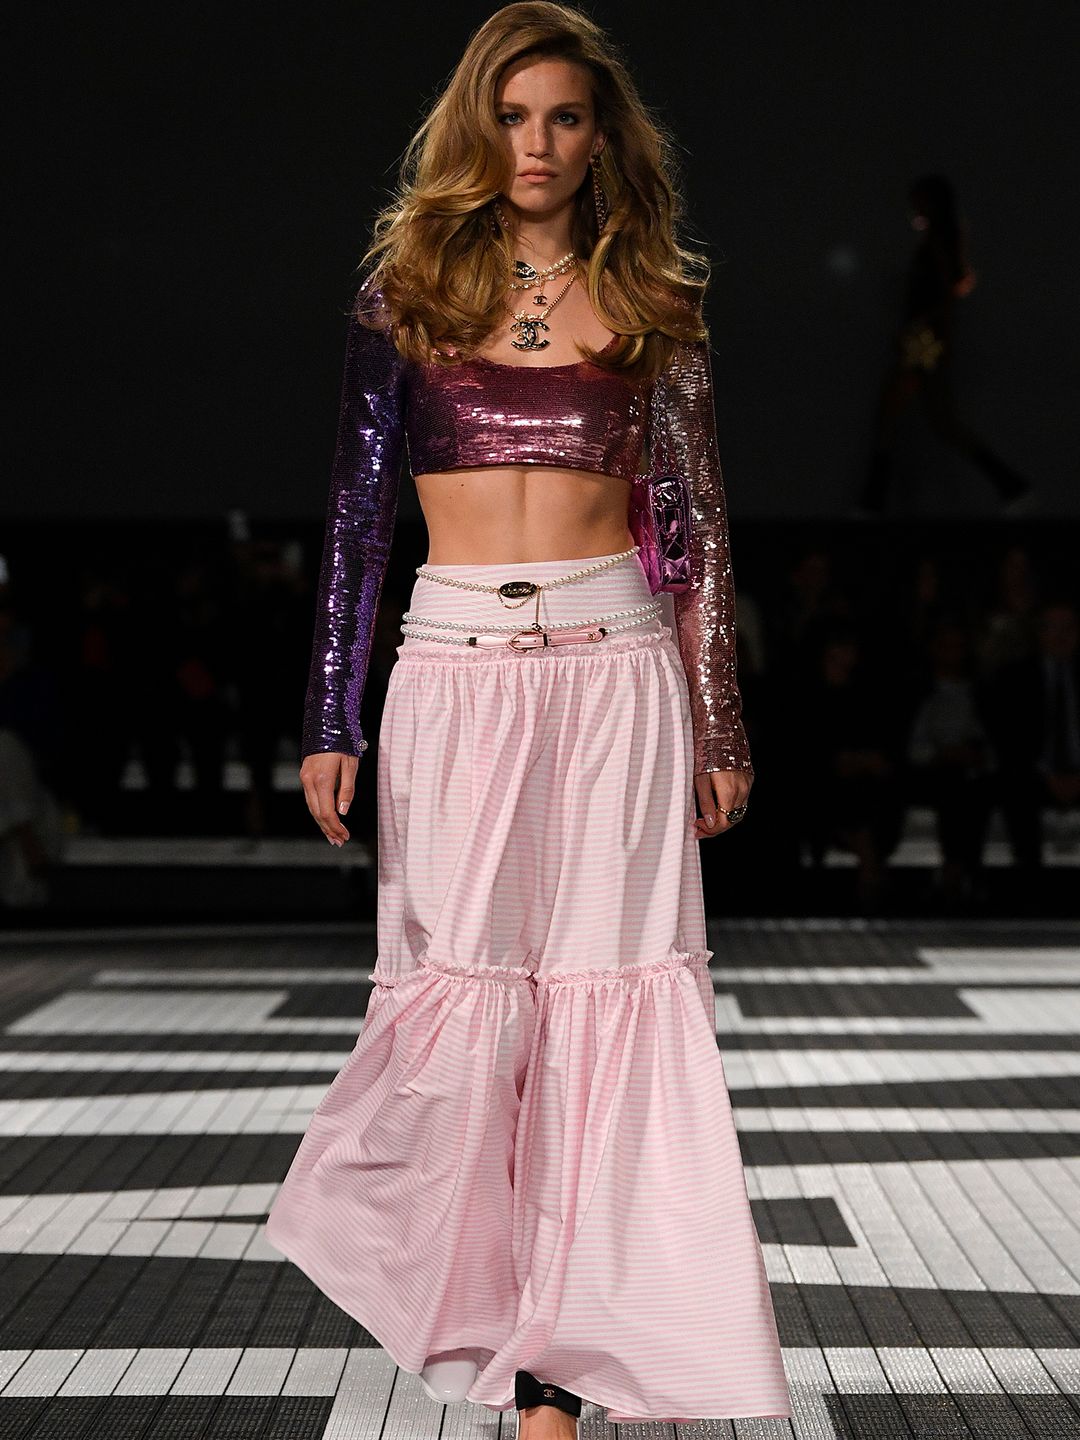 Chanel model wearing cropped sequin top and pink tiered skirt